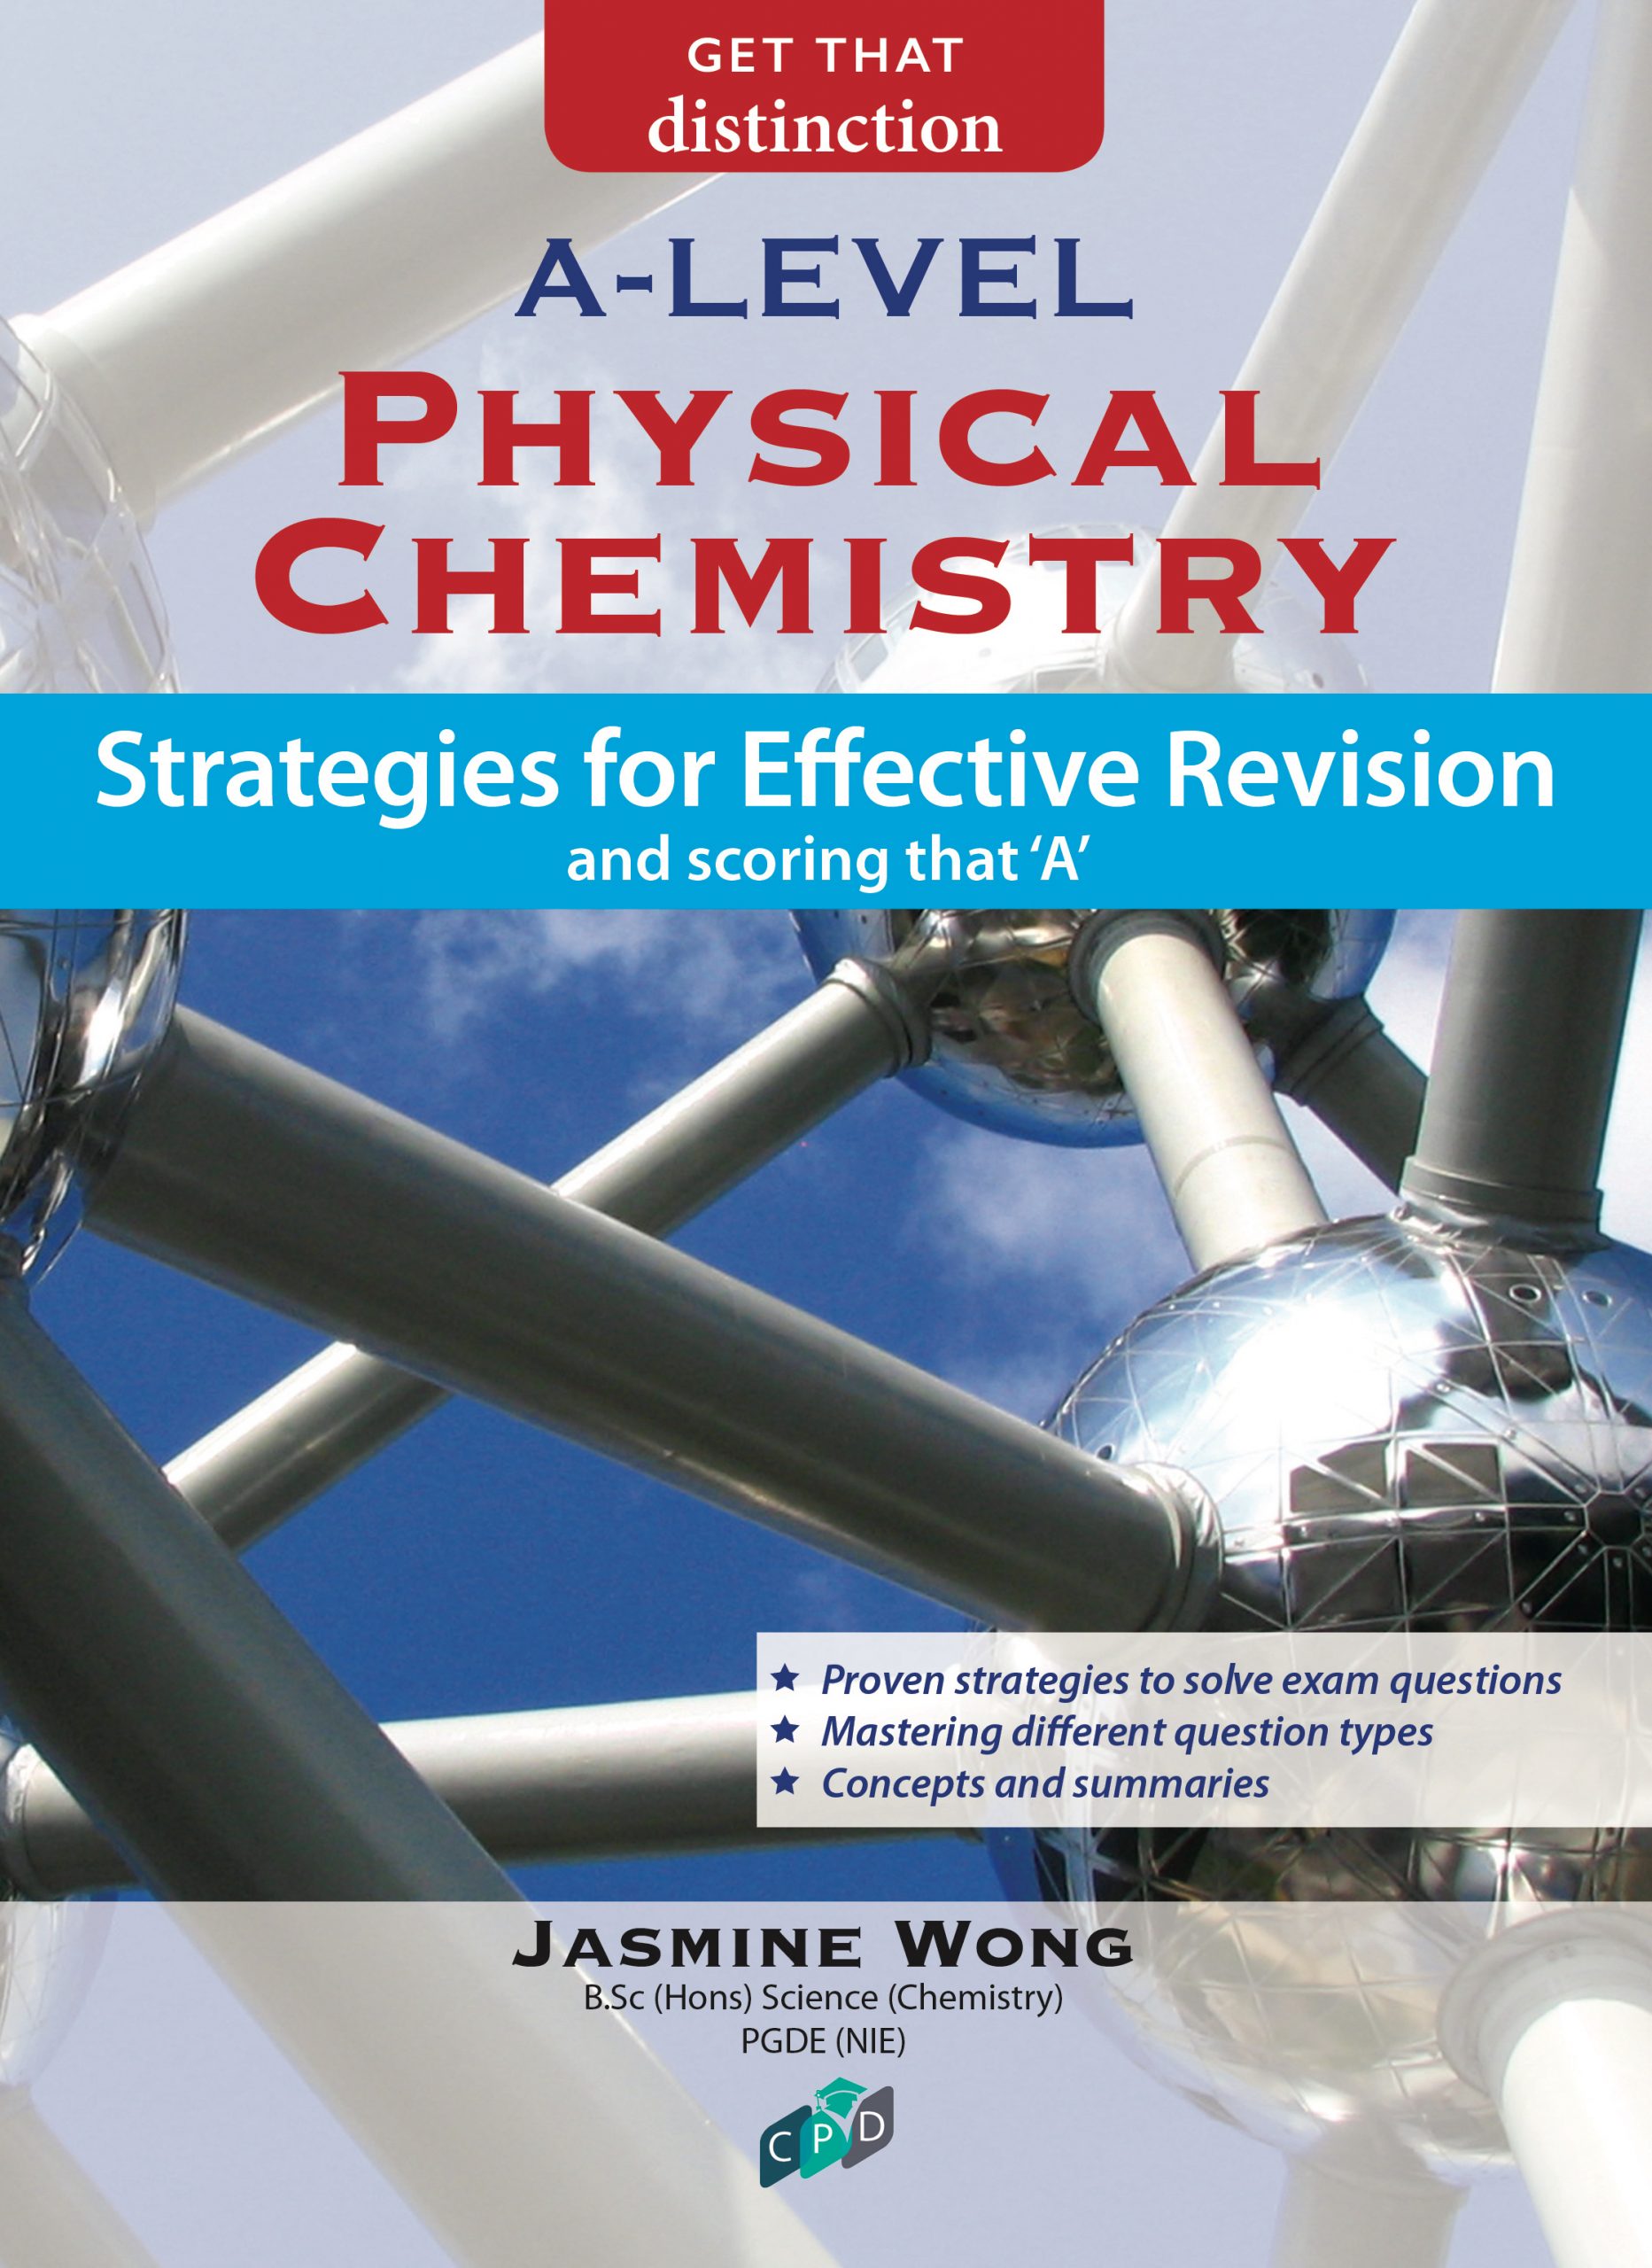 chemistry notes pdf free download